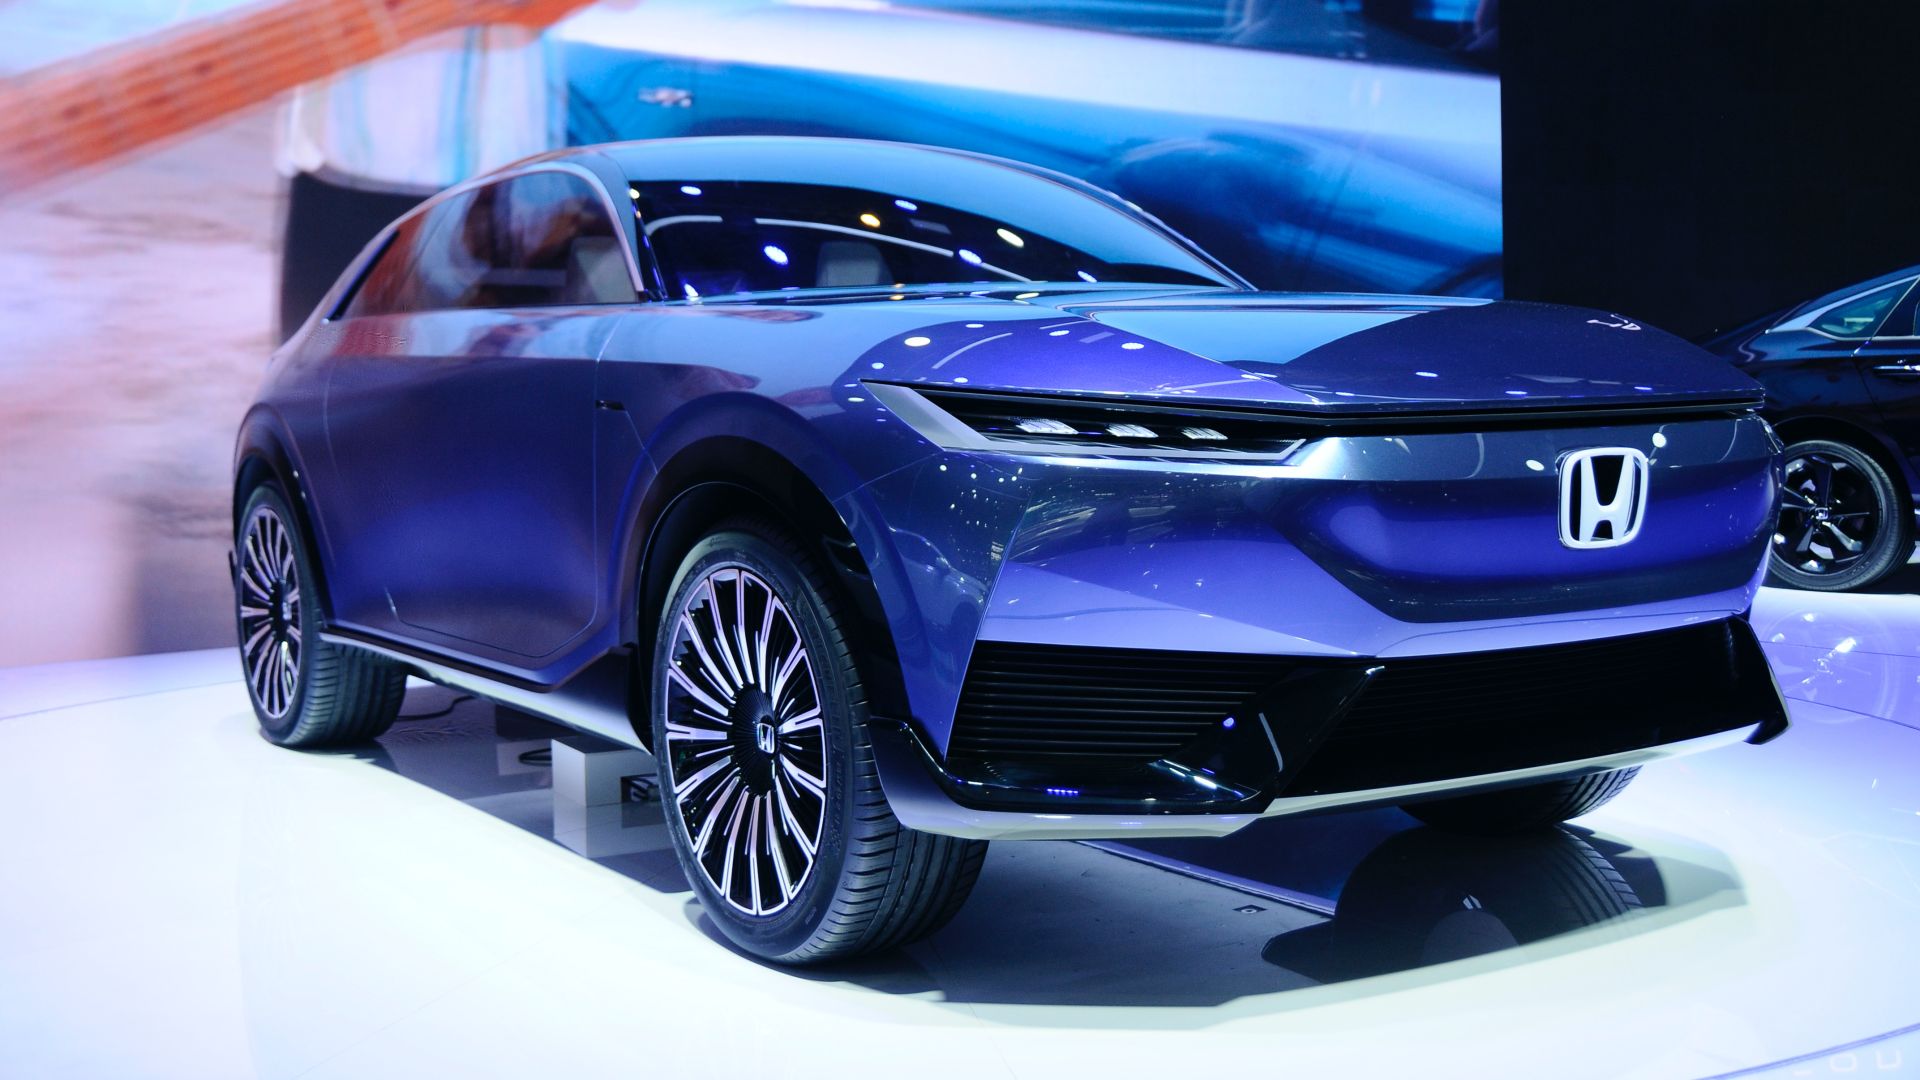 Honda SUV e:concept Is An Enticing Preview Of The Brand's First EV For ...